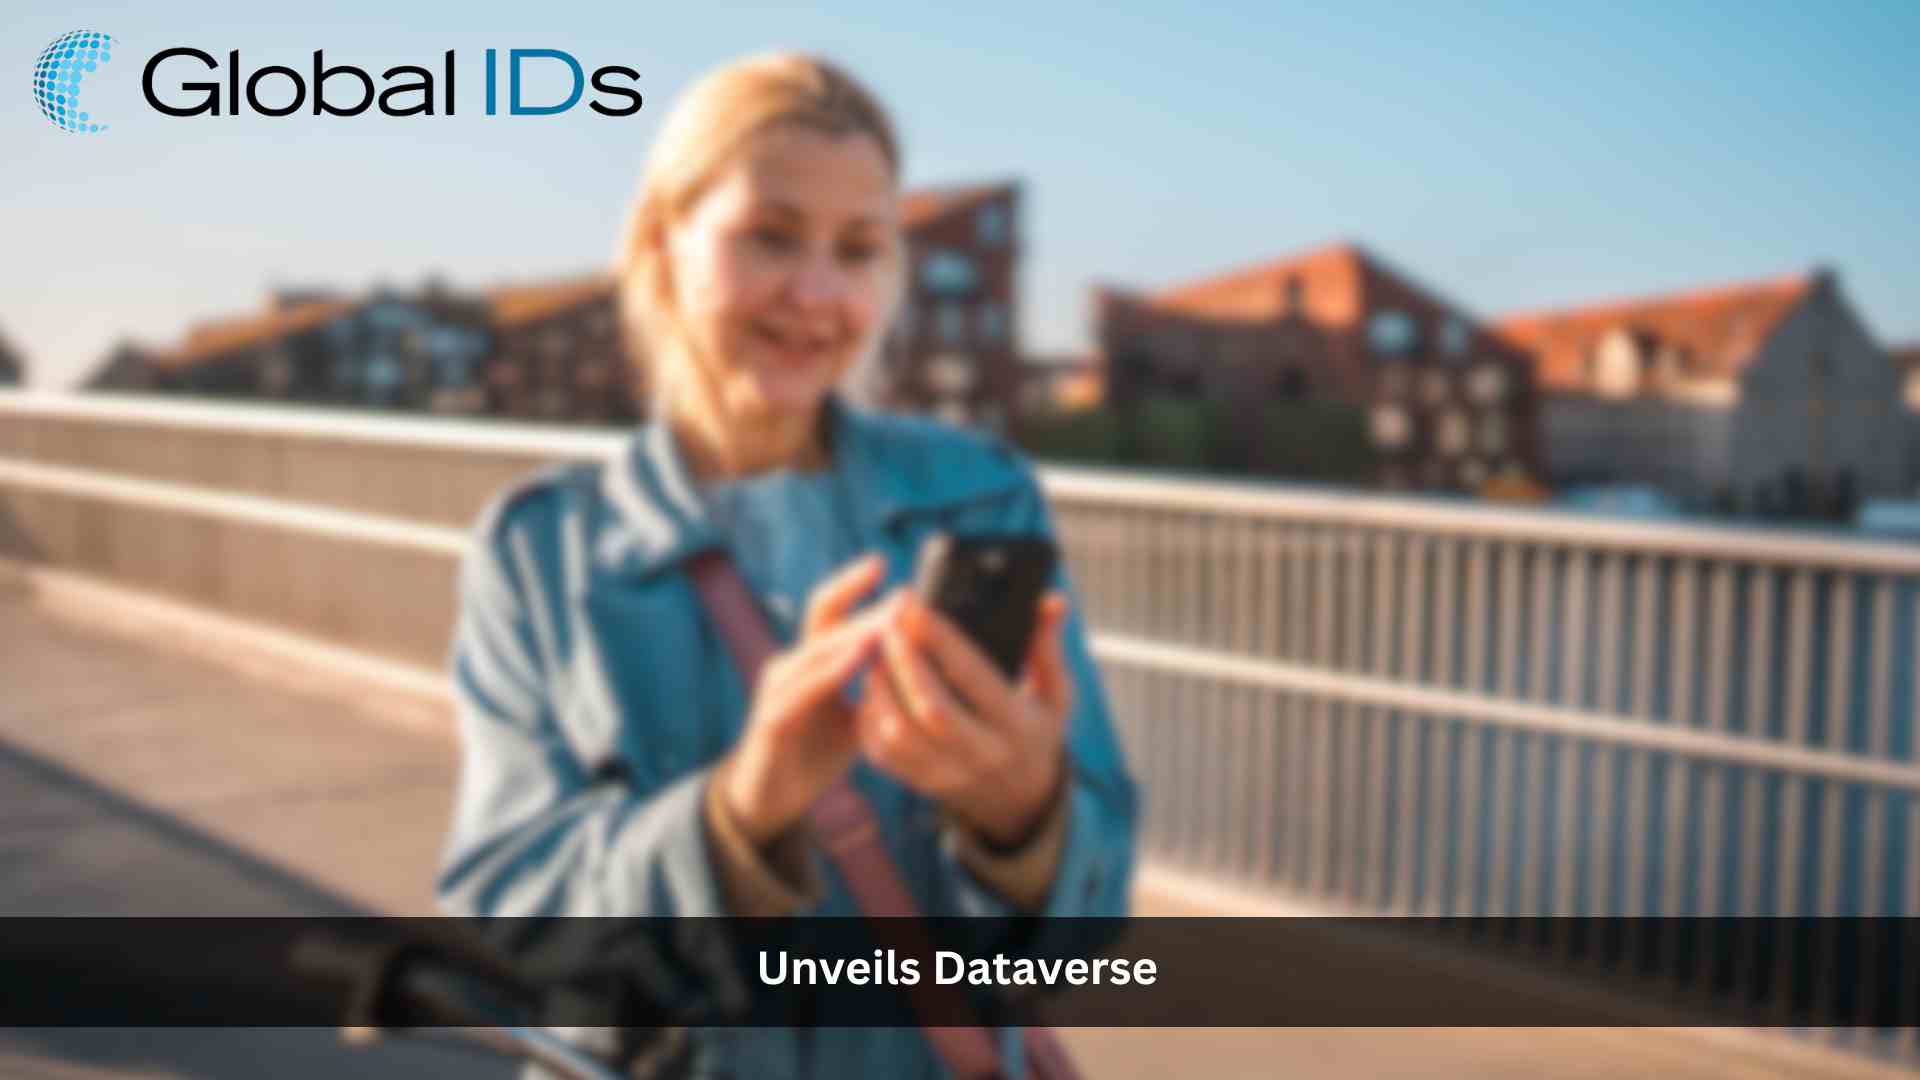 Global IDs Unveils DataVerse - A Pioneering Visualization to Govern Data Quality as the Data Moves